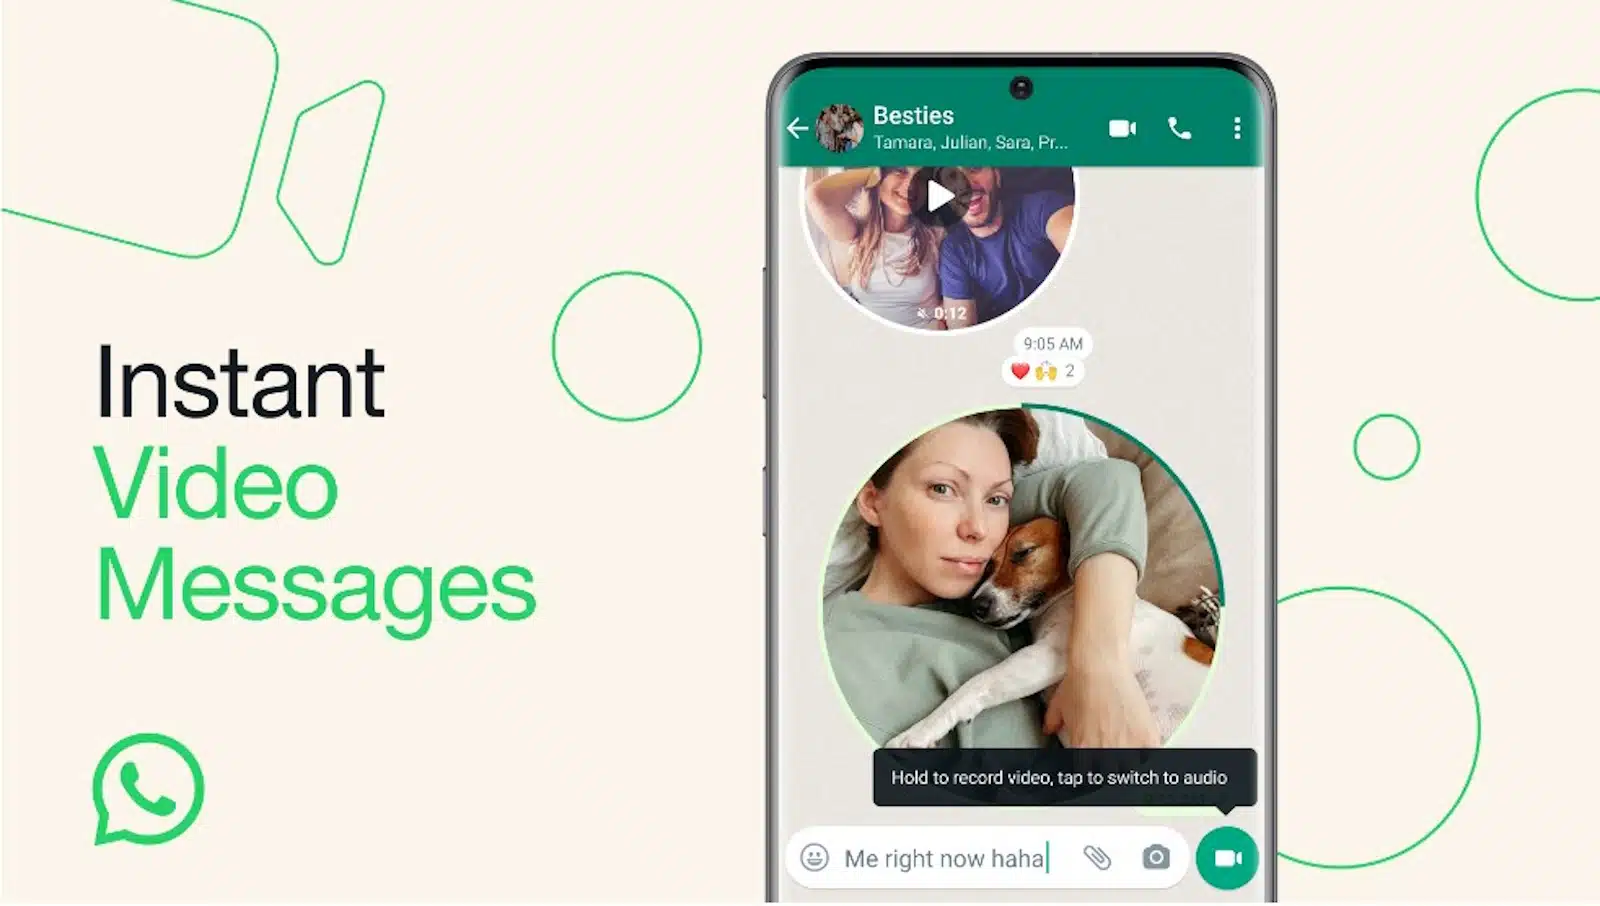 You can send 60-second instant video messages on WhatsApp now